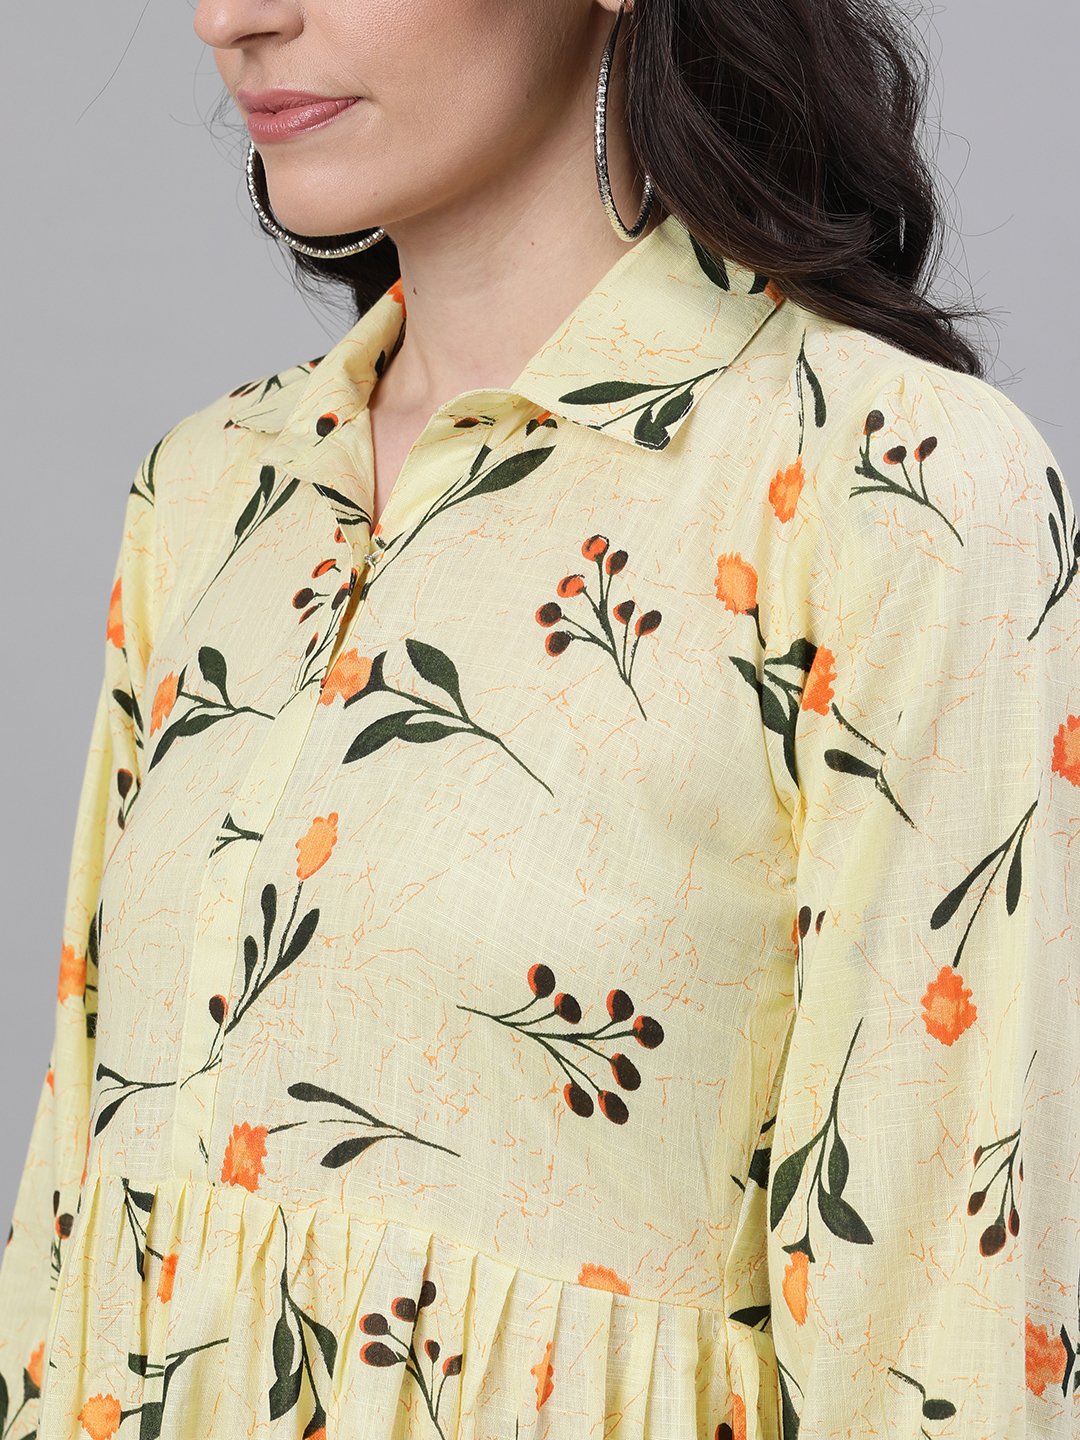 Women's Yellow Floral Printed Shirt Collar Cotton A-Line Dress - Nayo Clothing